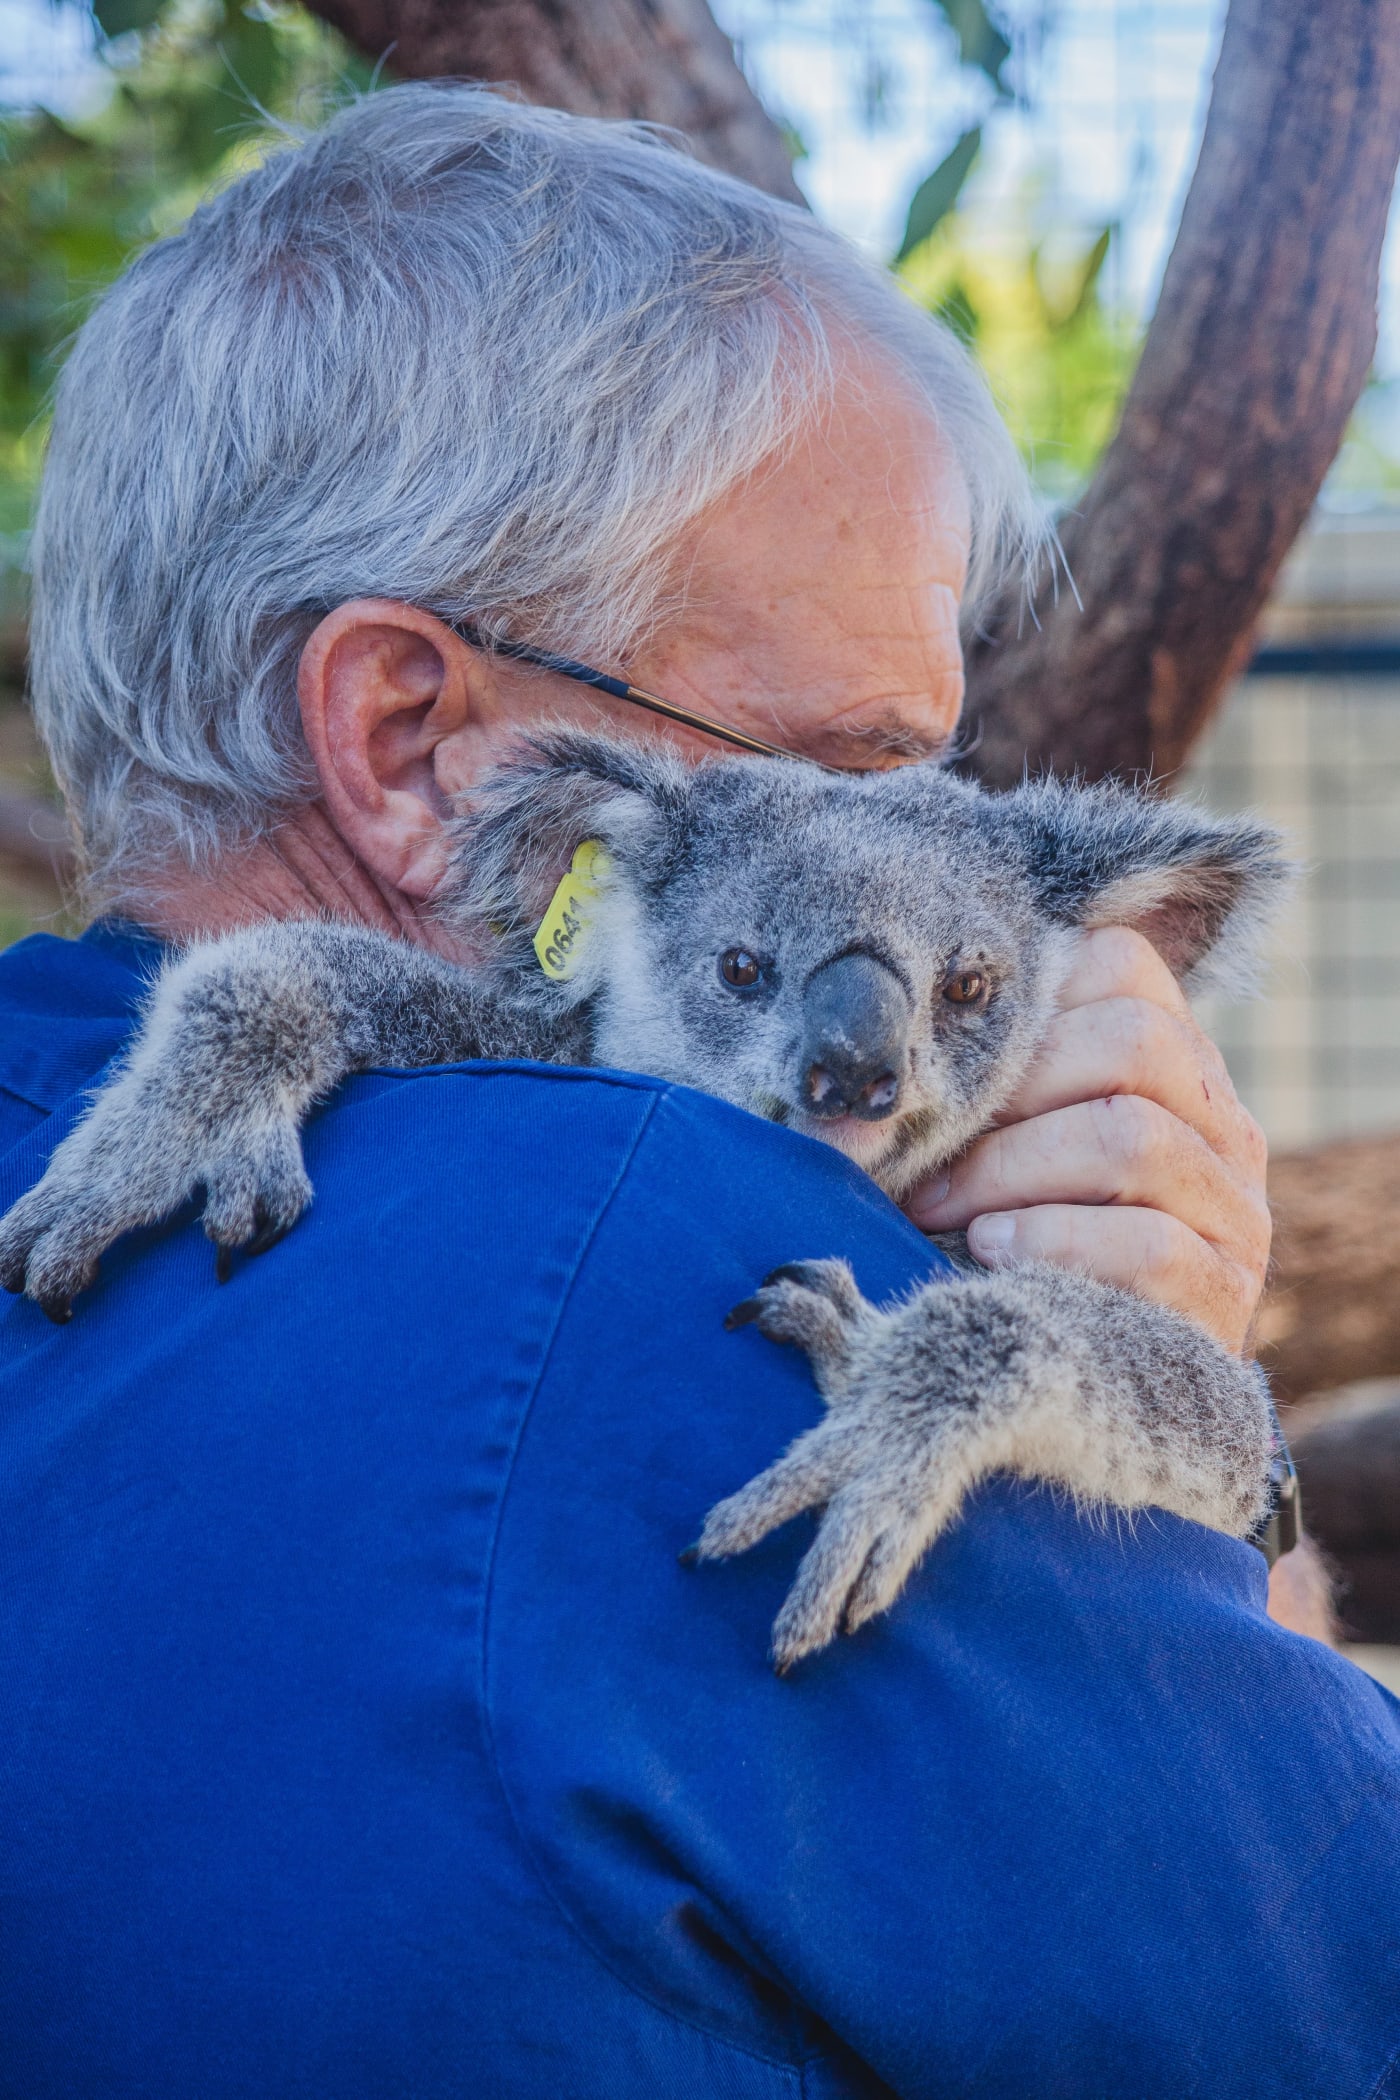 Peter Luker, koala carer, with Maryanne the koala prior to her release to the wild